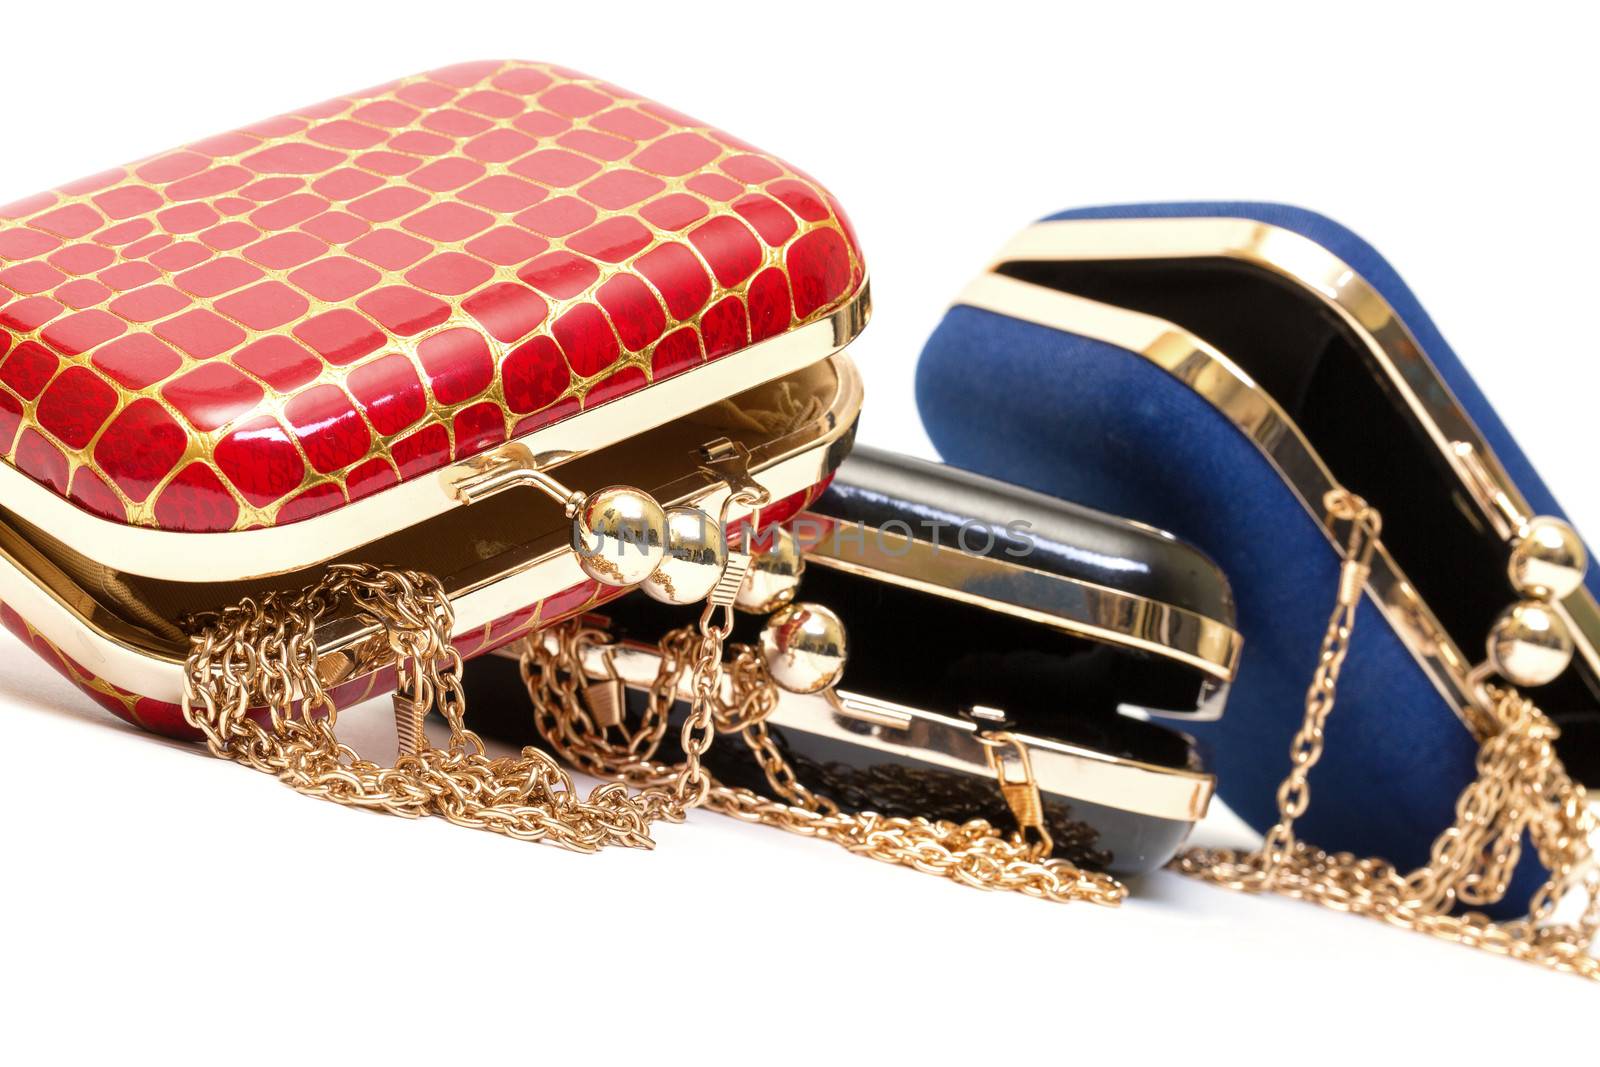 Fashionable female open handbags by Discovod